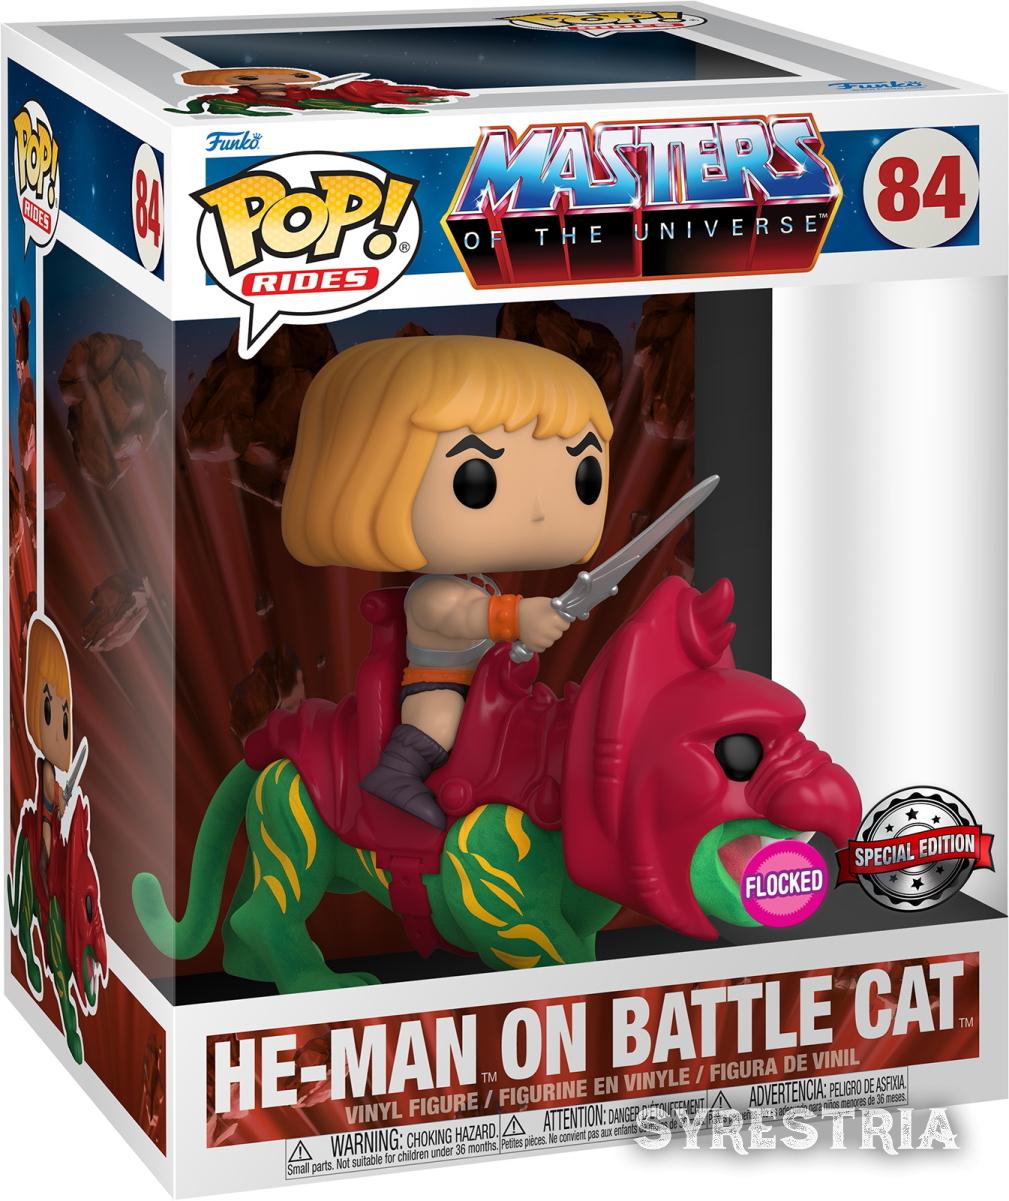 Masters of the Universe - He-Man on Battle Cat 84 Special Edition Flocked - Funko Pop! Rides - Vinyl Figur